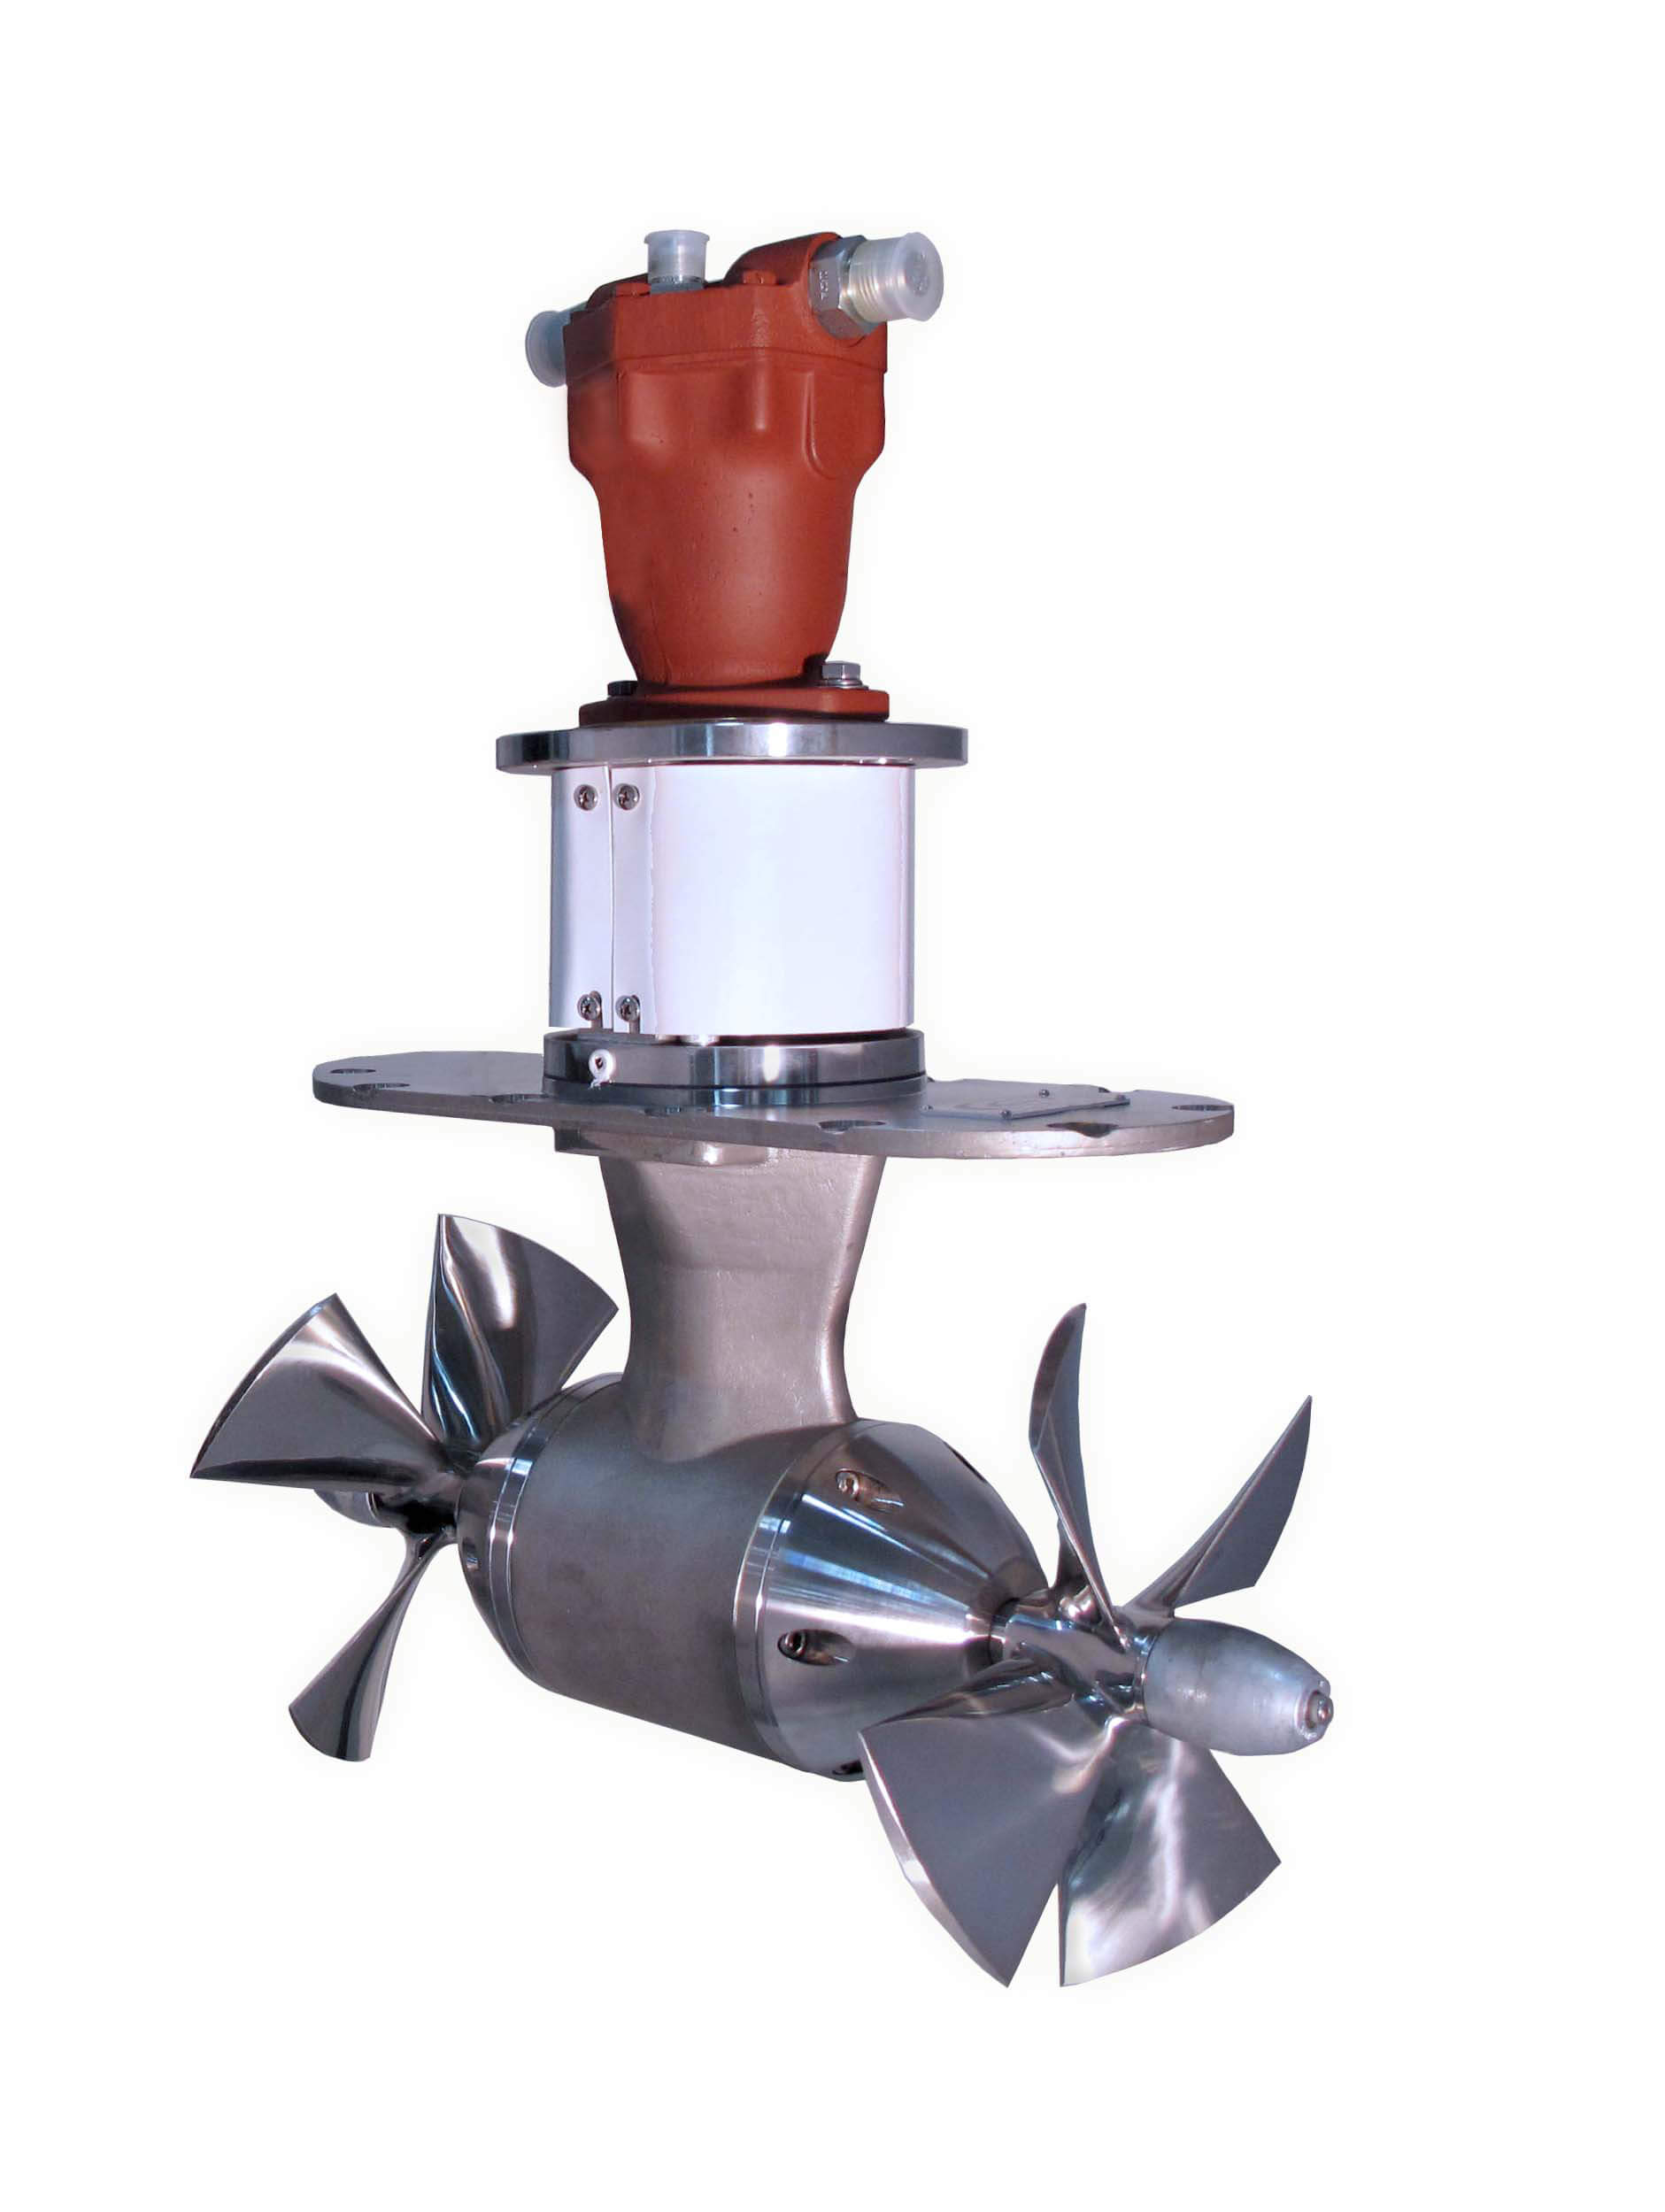 external bow thruster for sailboat